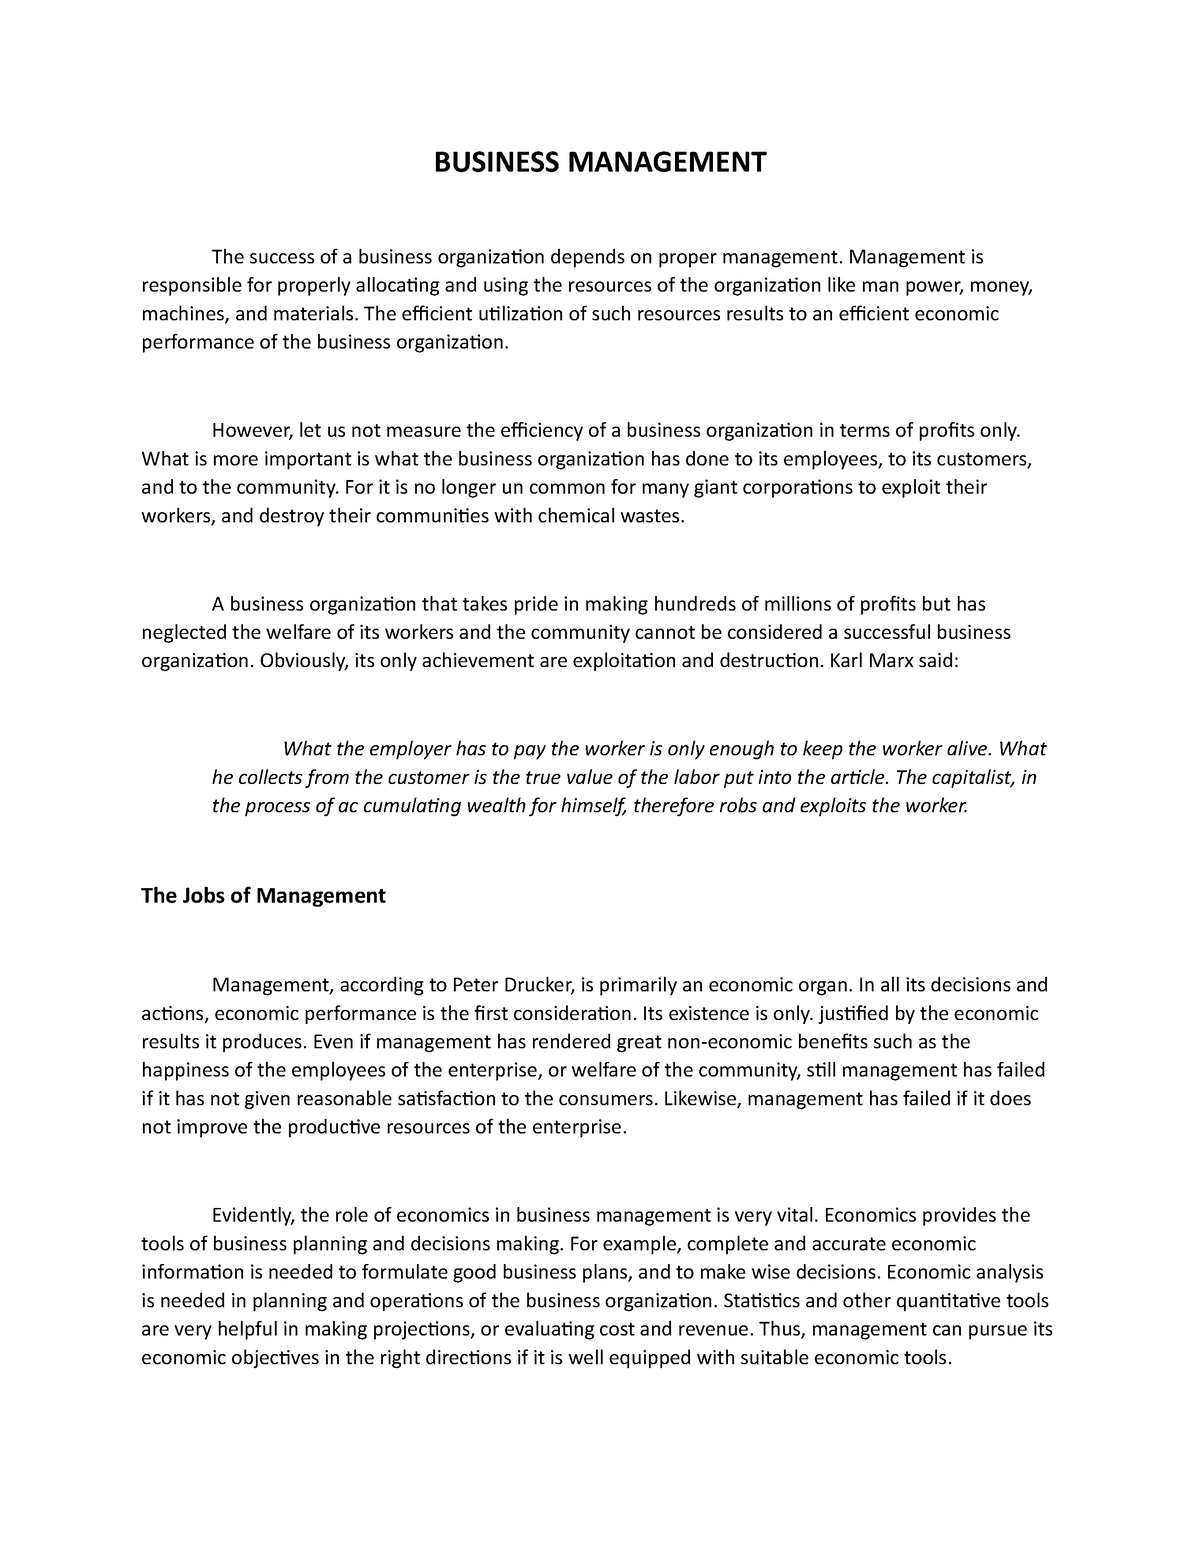 sample thesis on business management